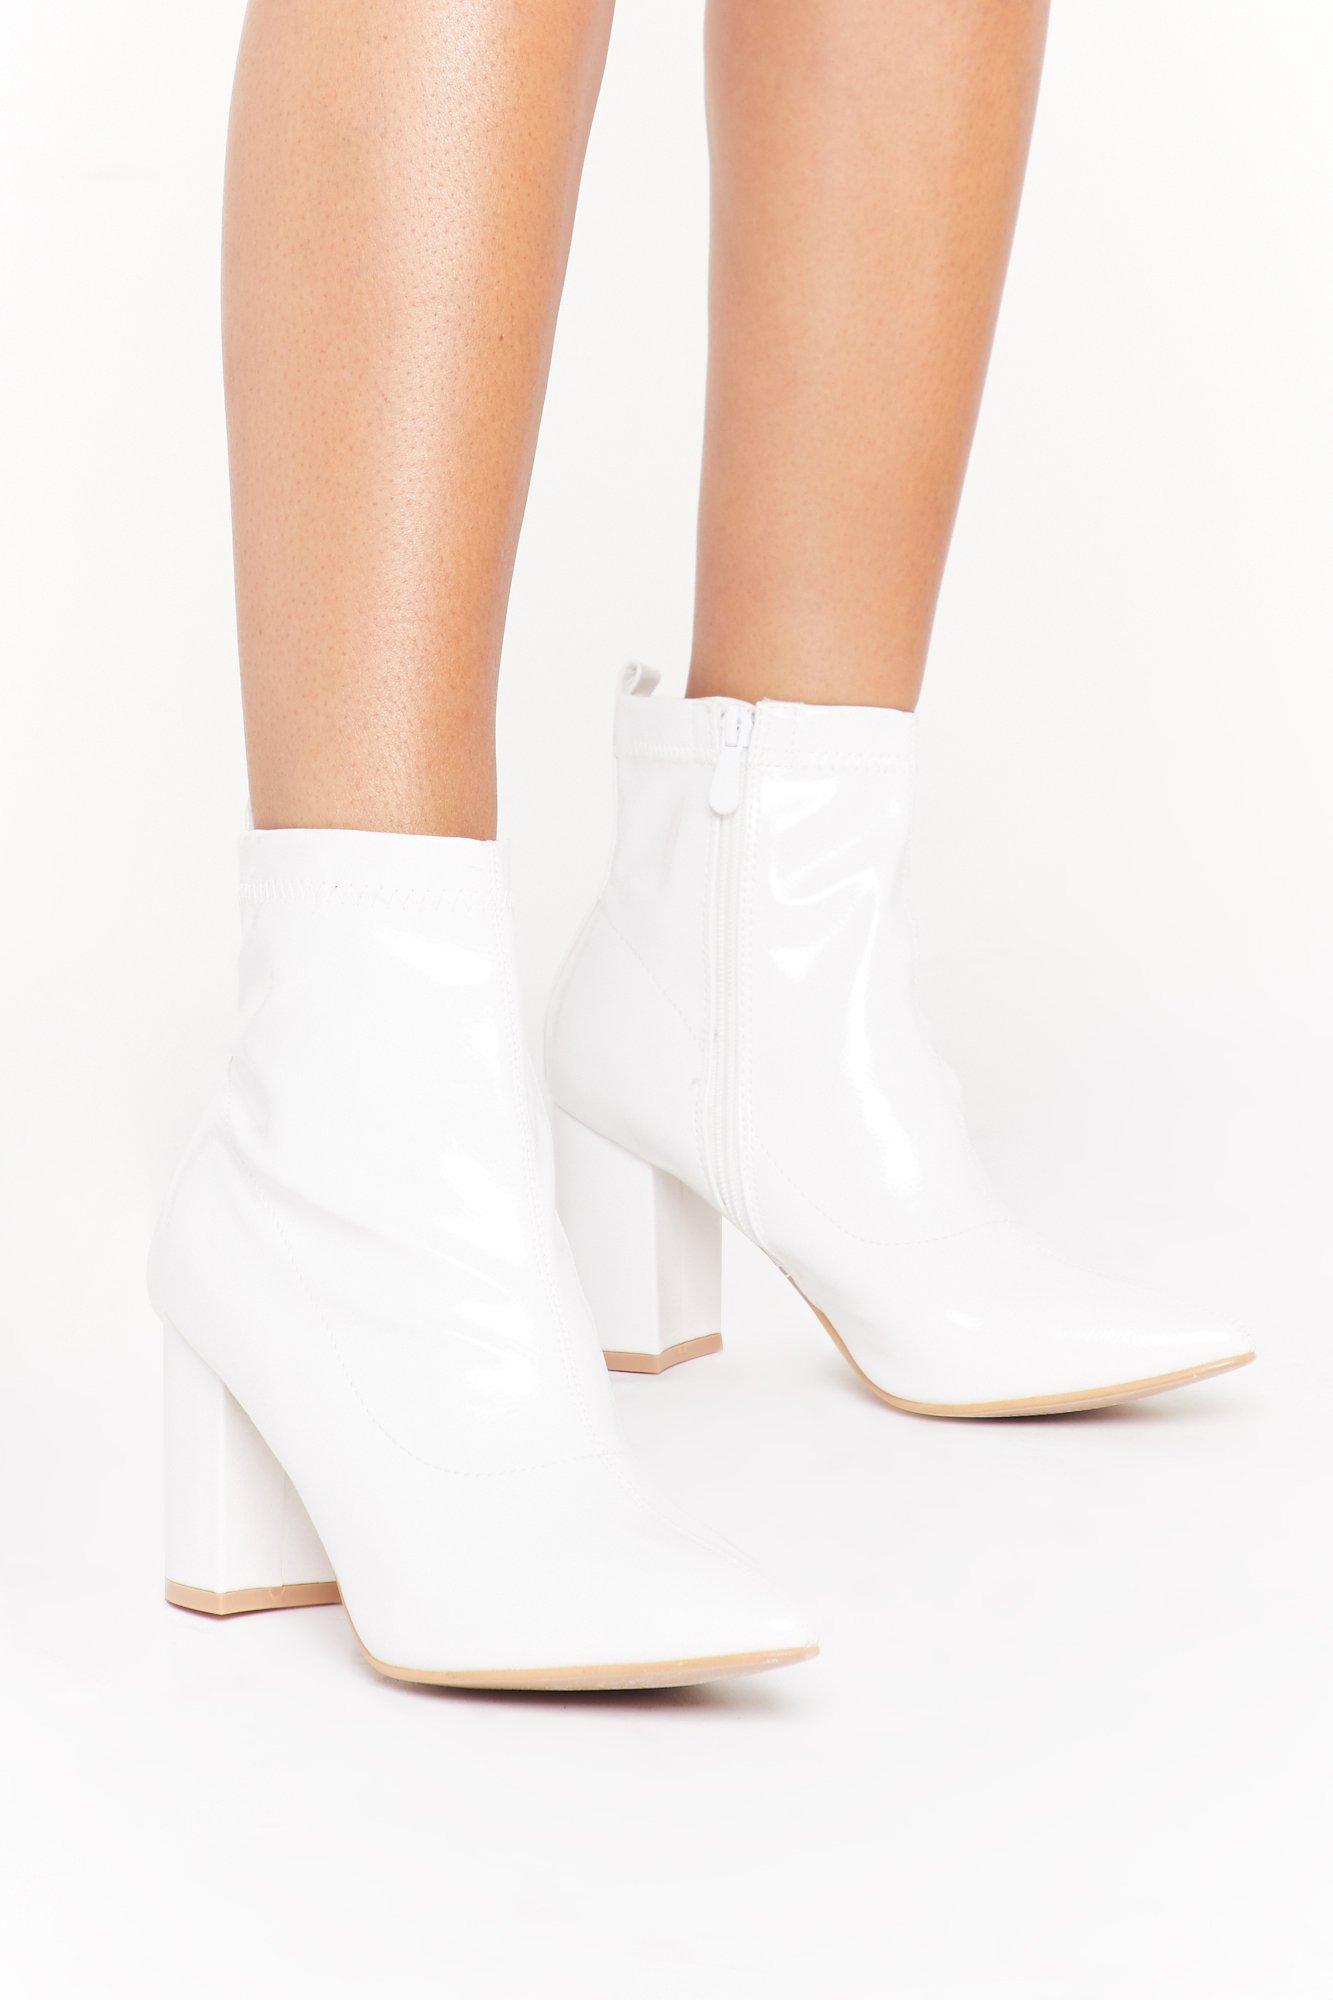 Street Style: White Ankle Boots | Fashion Cognoscente